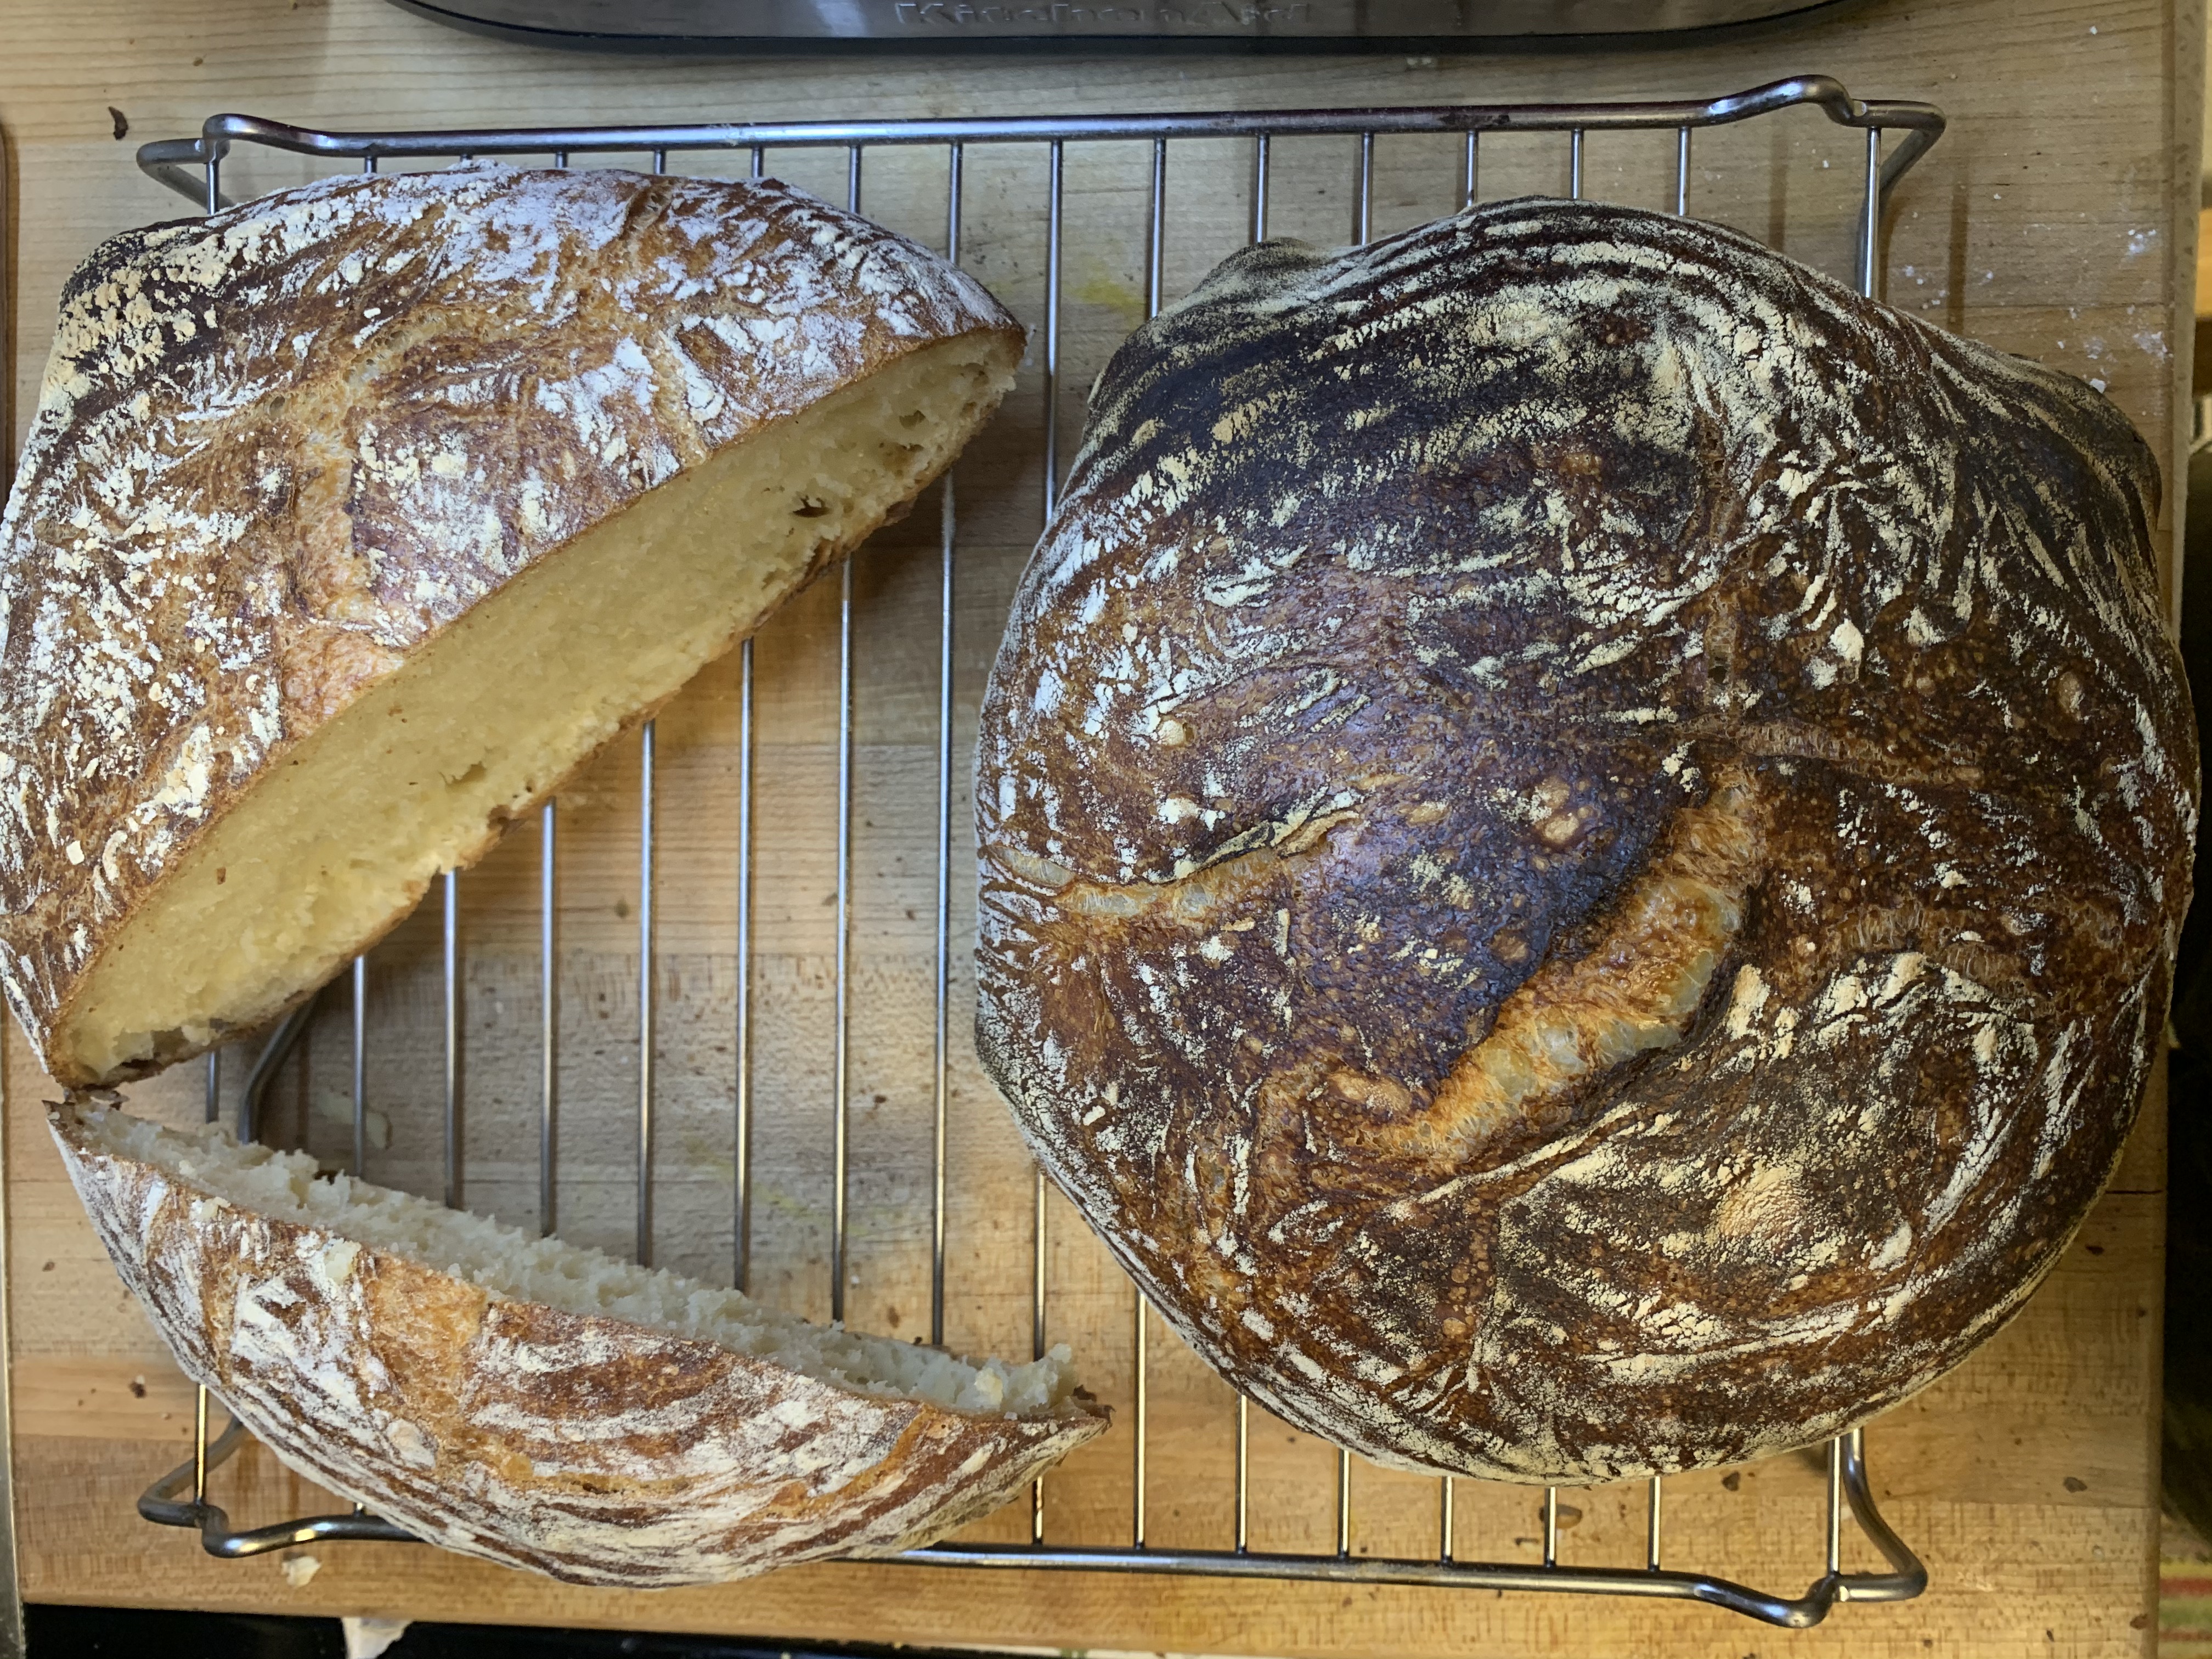 Slow fermentation bread Good.  Blonde colored, thin crust, two loaves